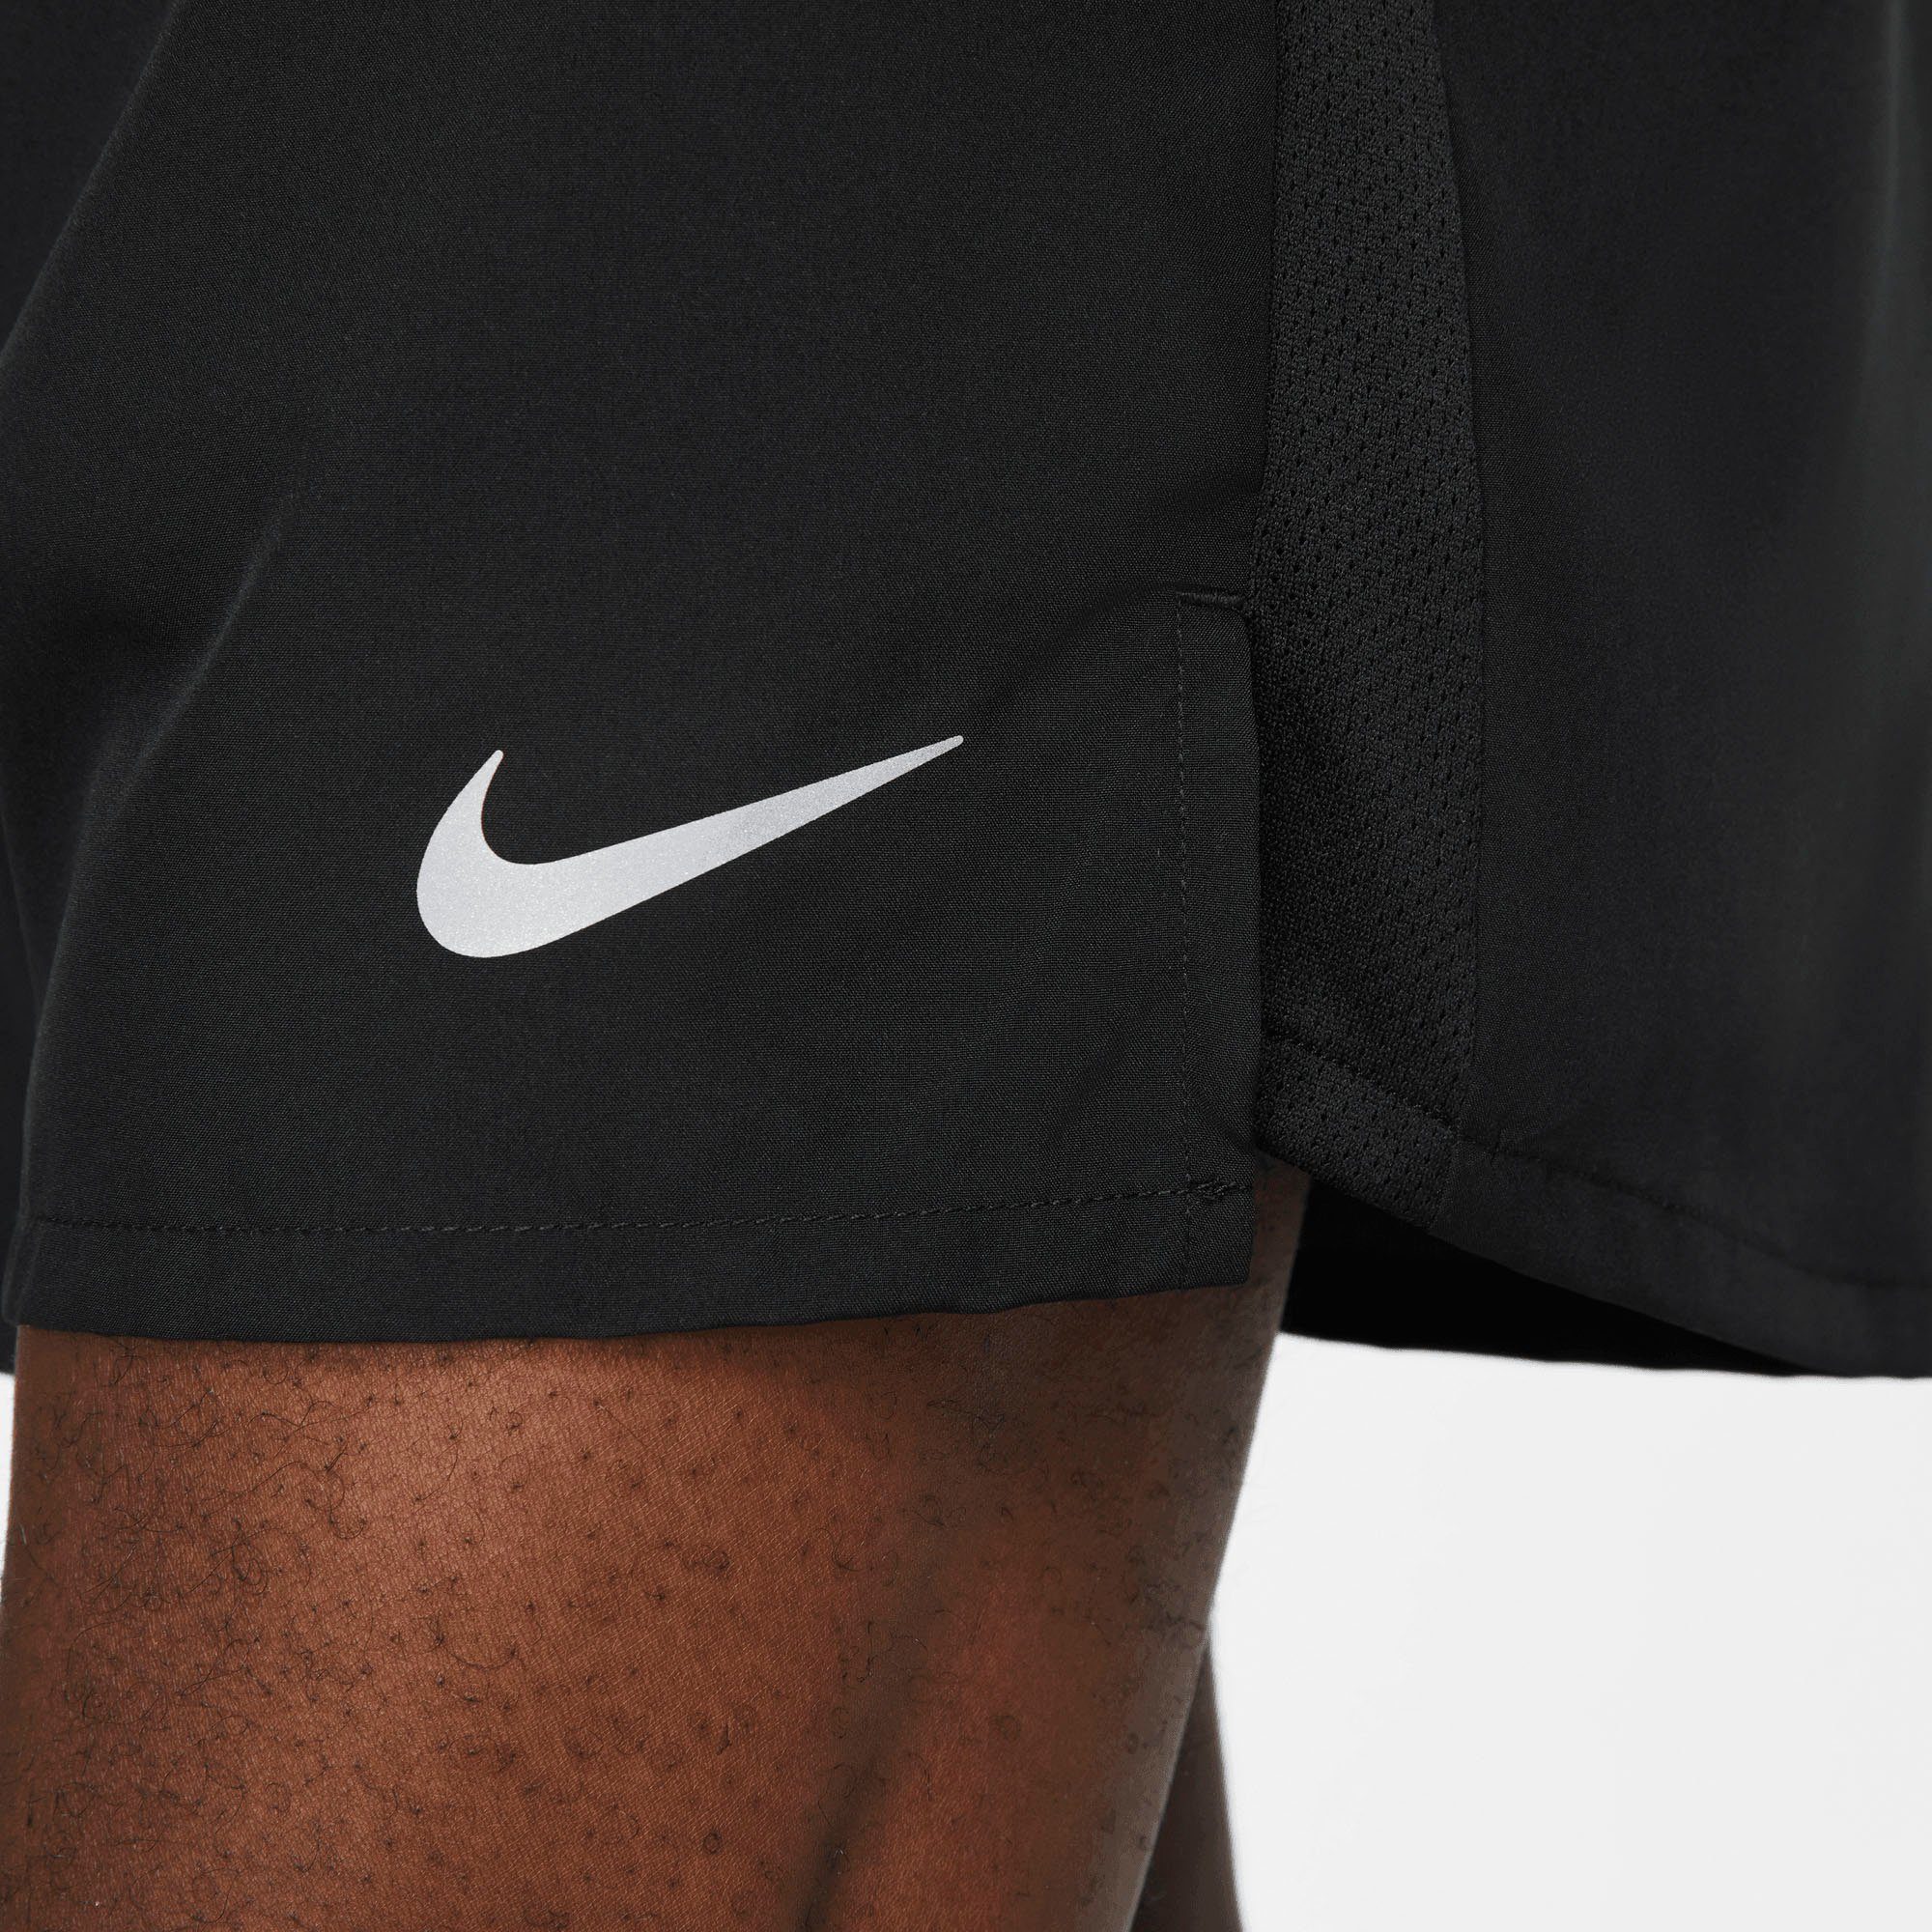 Brief-Lined Dri-FIT Challenger Laufshorts Running Men's " Nike Shorts